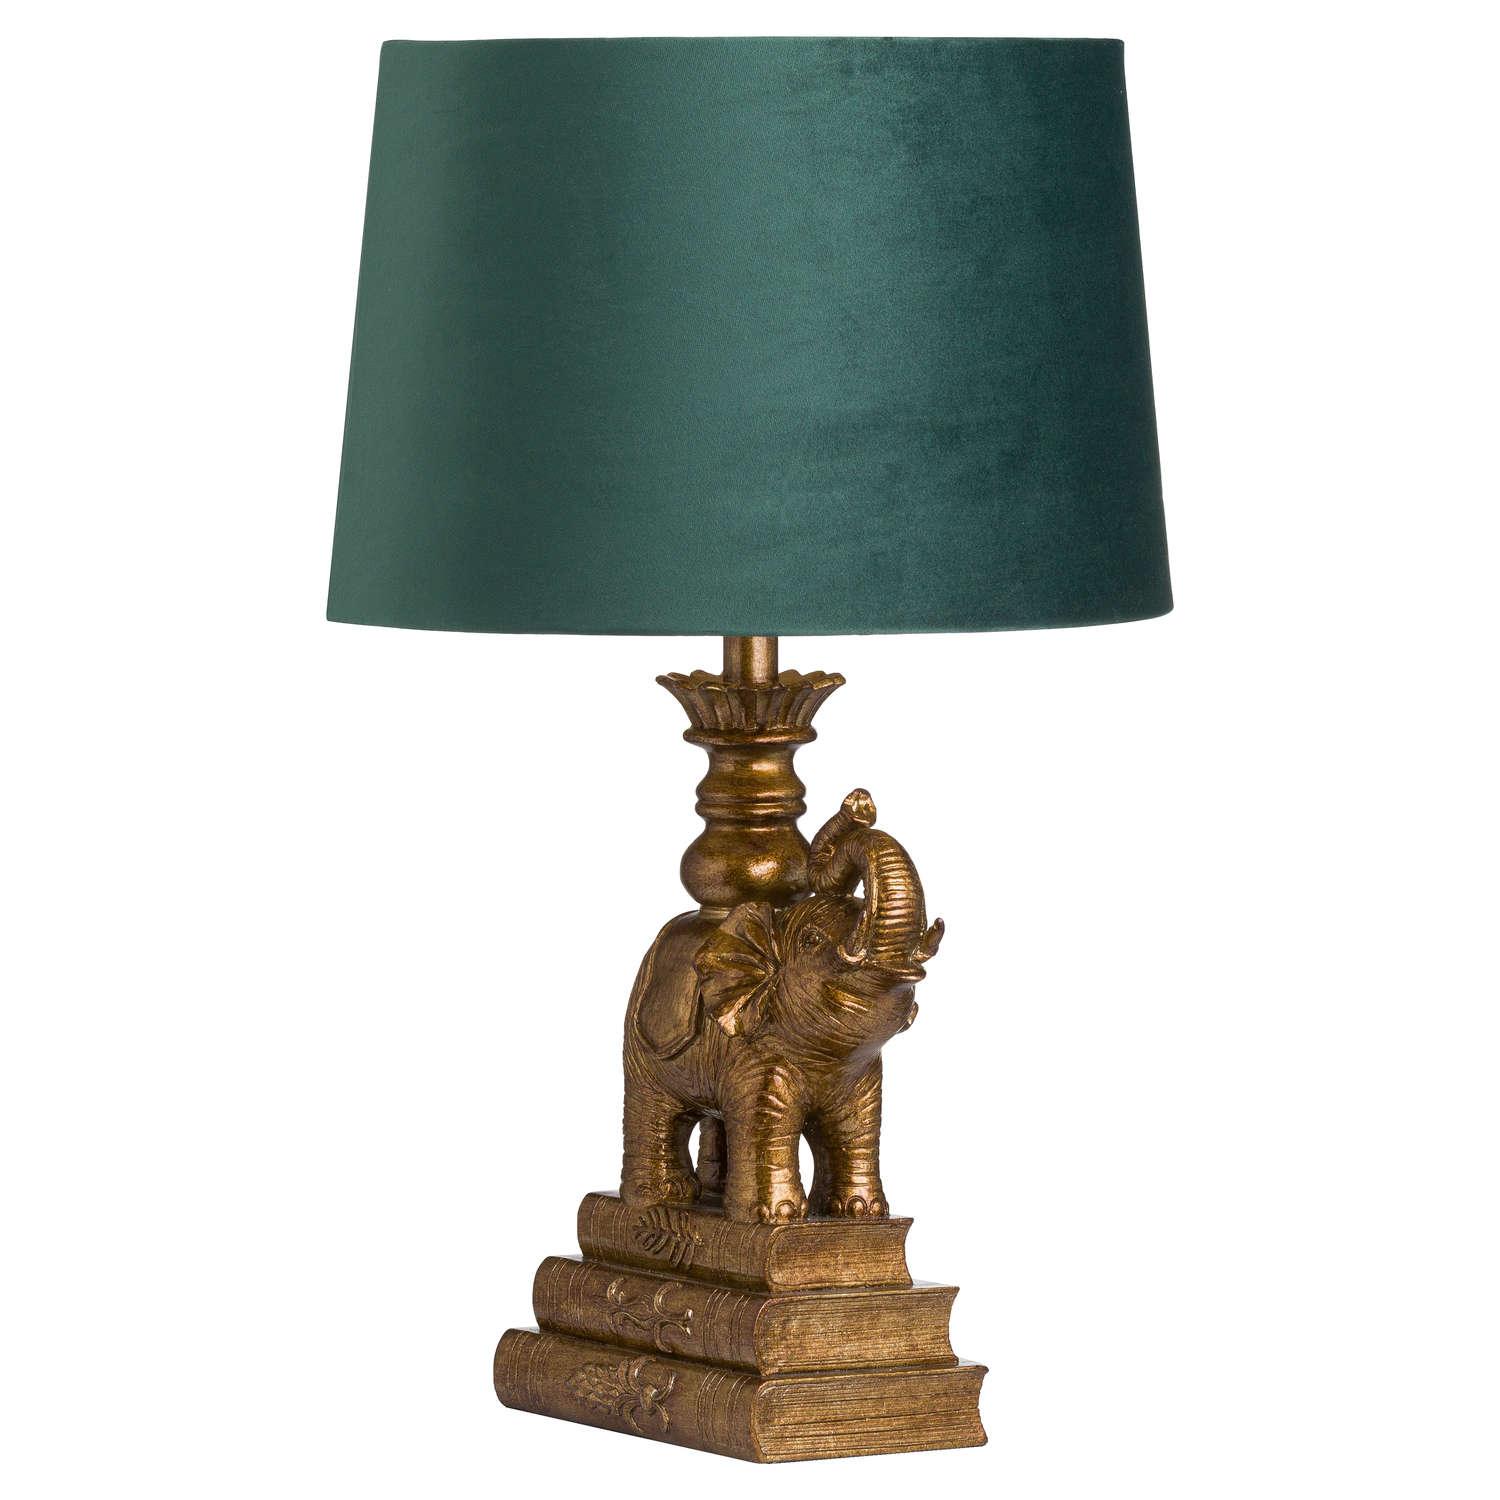 Antique Gold Elephant Table Lamp With Emerald Green Shade - Vookoo Lifestyle